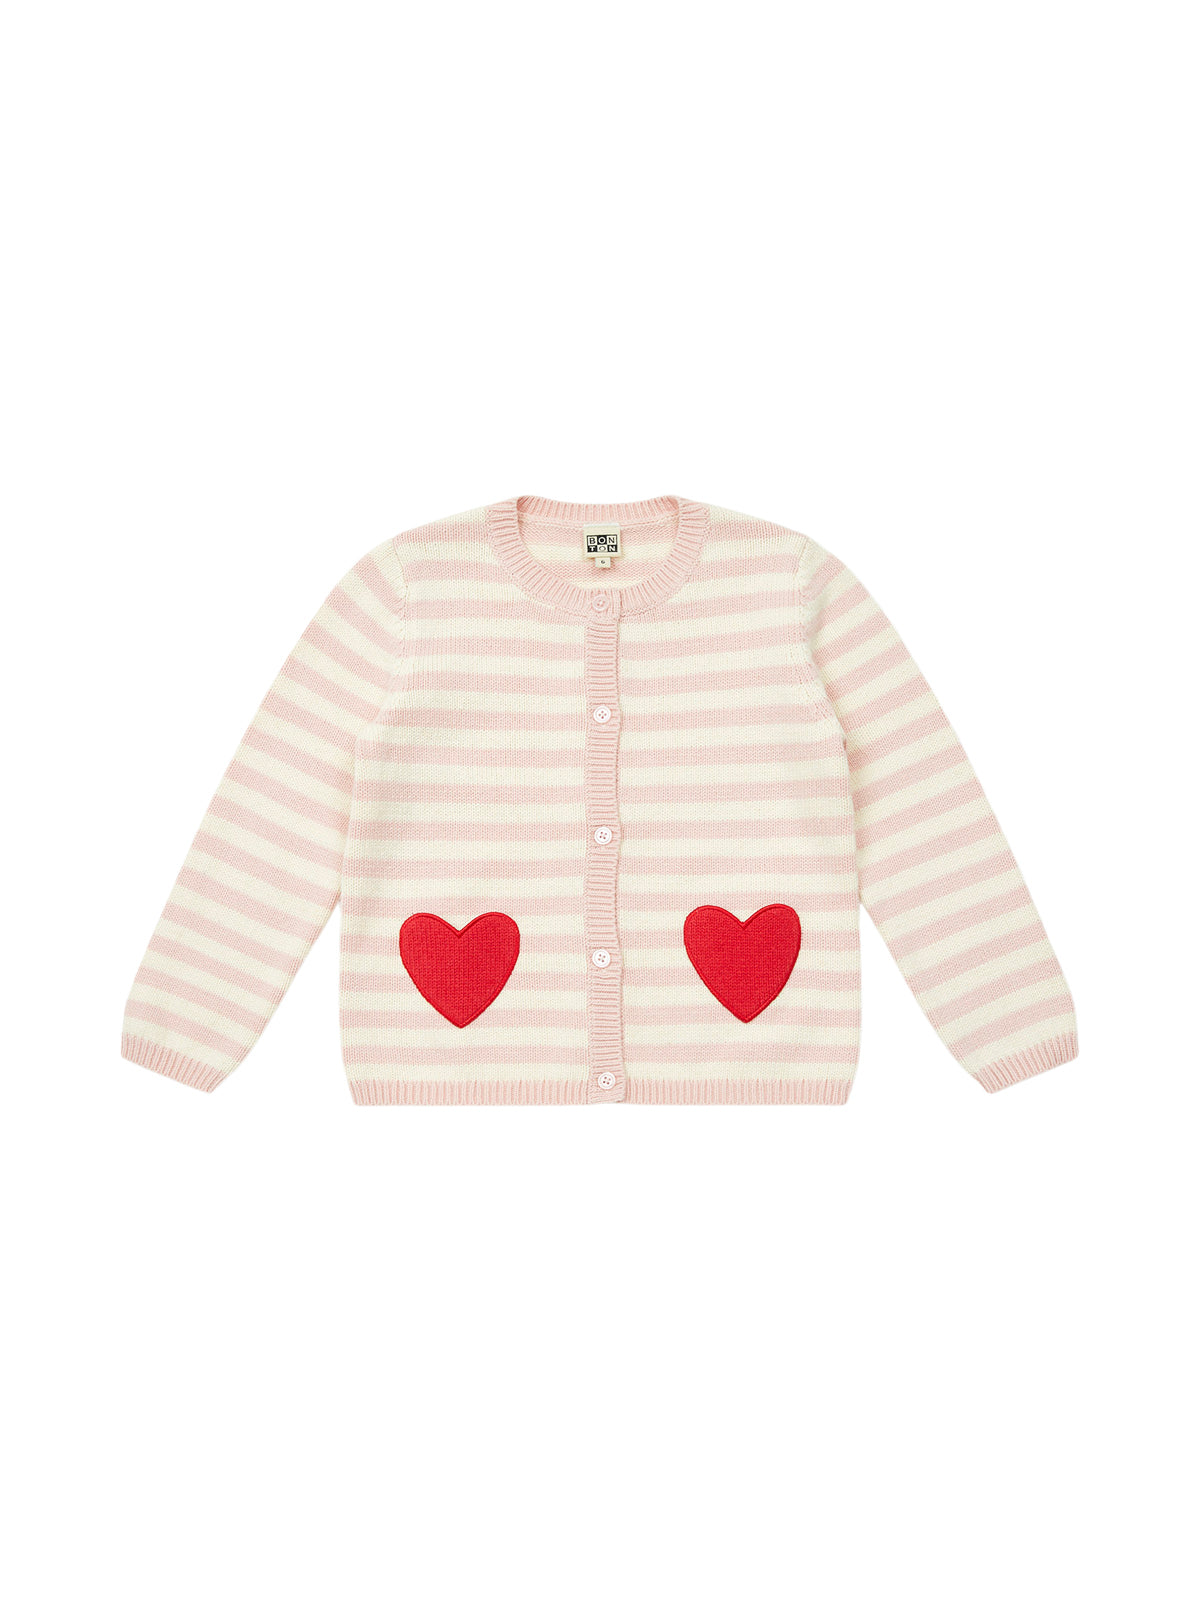 pink striped sweater with heart pockets